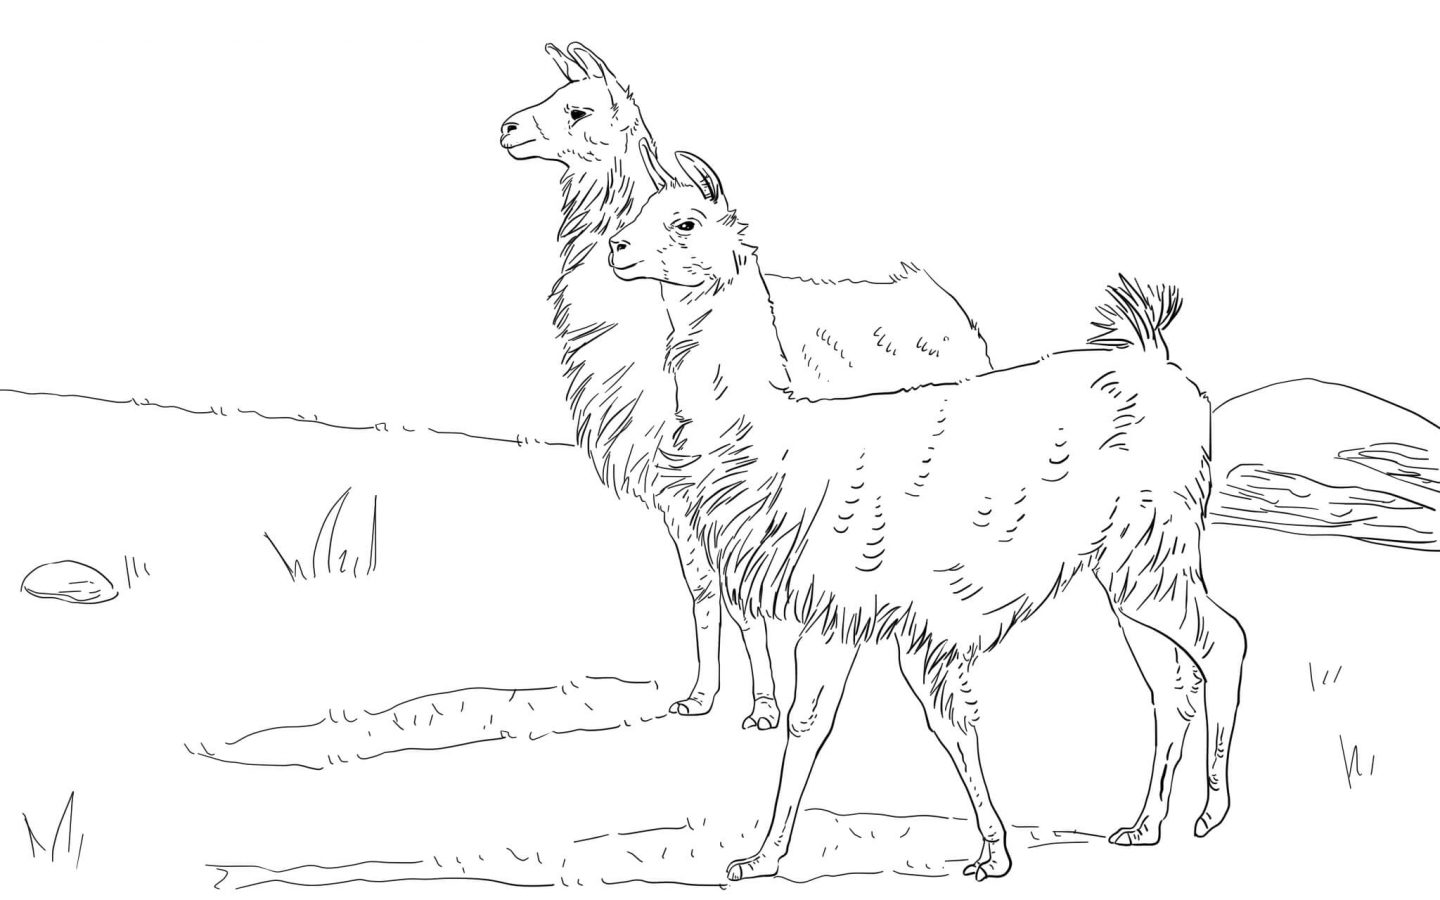 Llama Coloring Page | Coloringnori - Coloring Pages for Kids